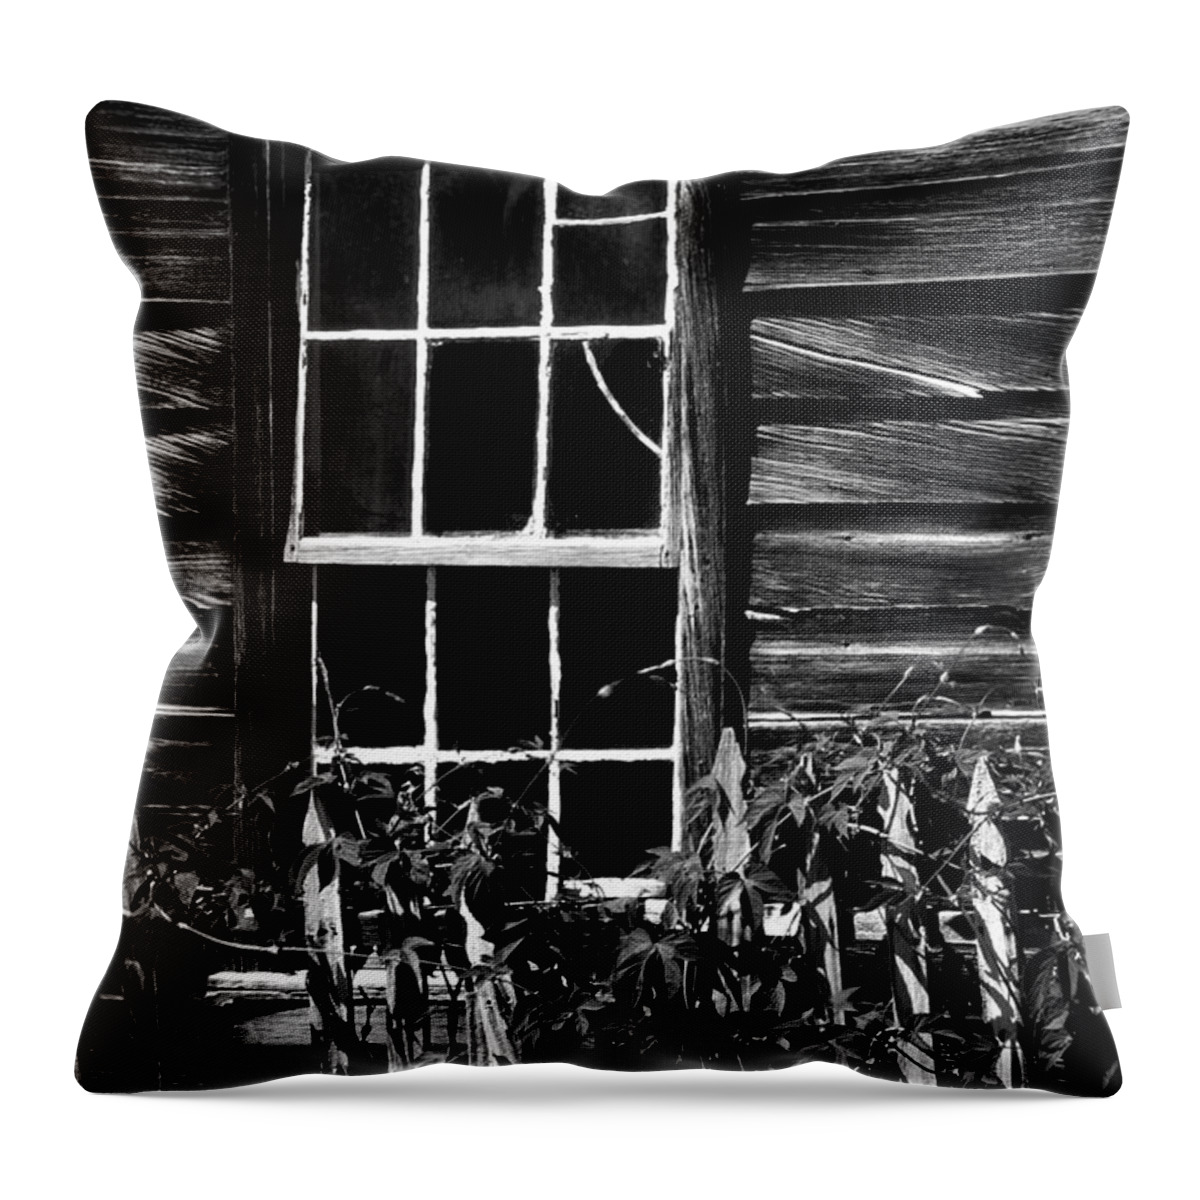 Bodie Throw Pillow featuring the photograph Window and Ivy #1 by Paul W Faust - Impressions of Light